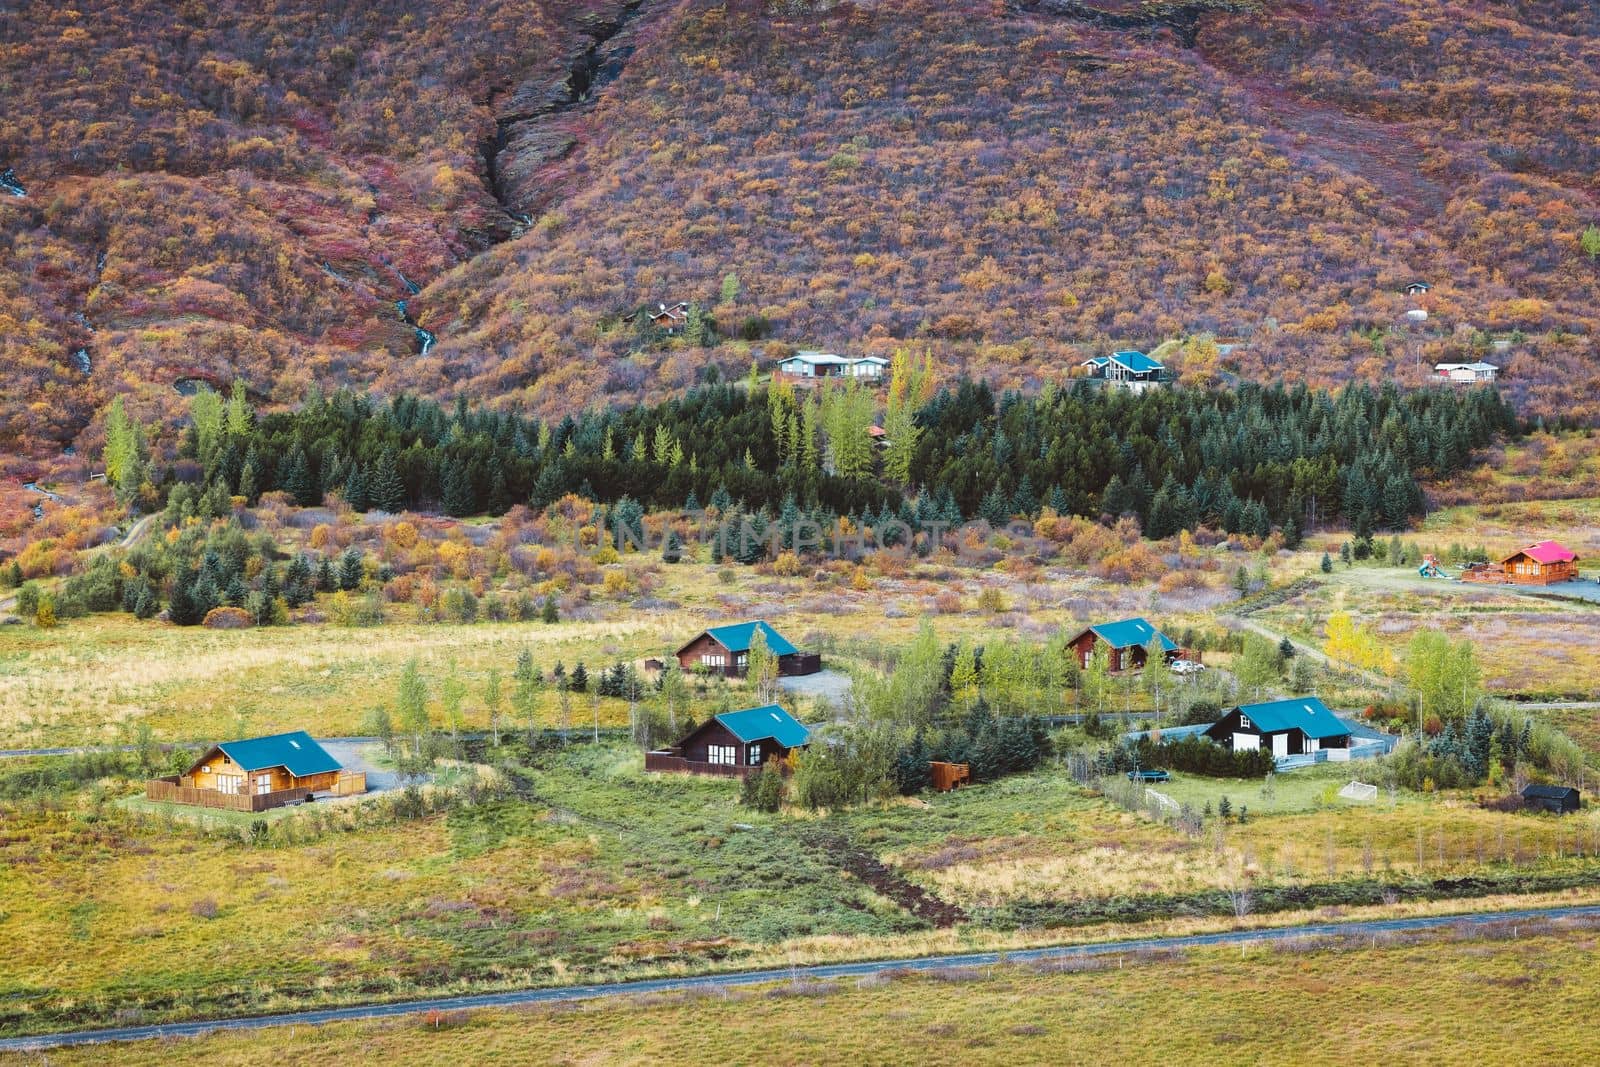 Little cottages in Iceland. Autumn nature, forest covered hill in the background.